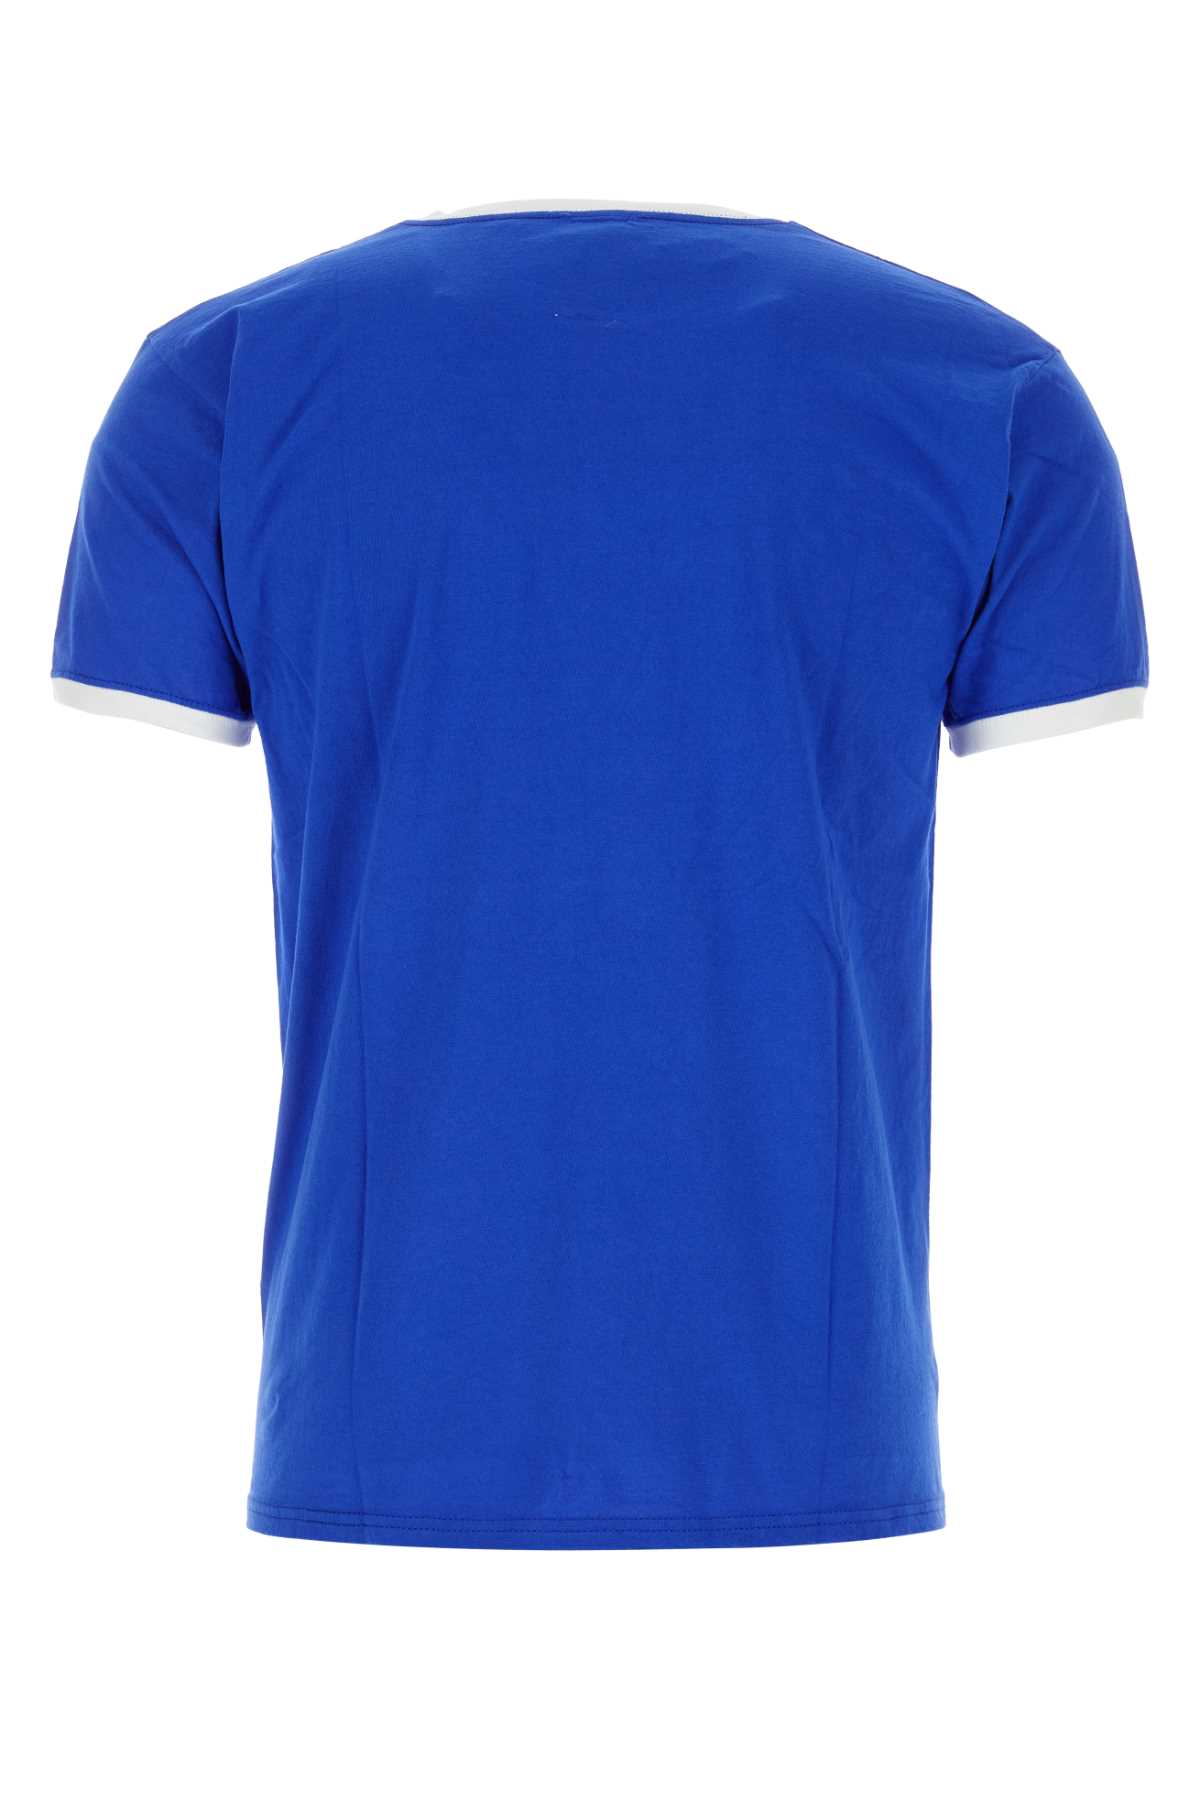 Wild Donkey Electric Blue Cotton T-shirt In Roywhi